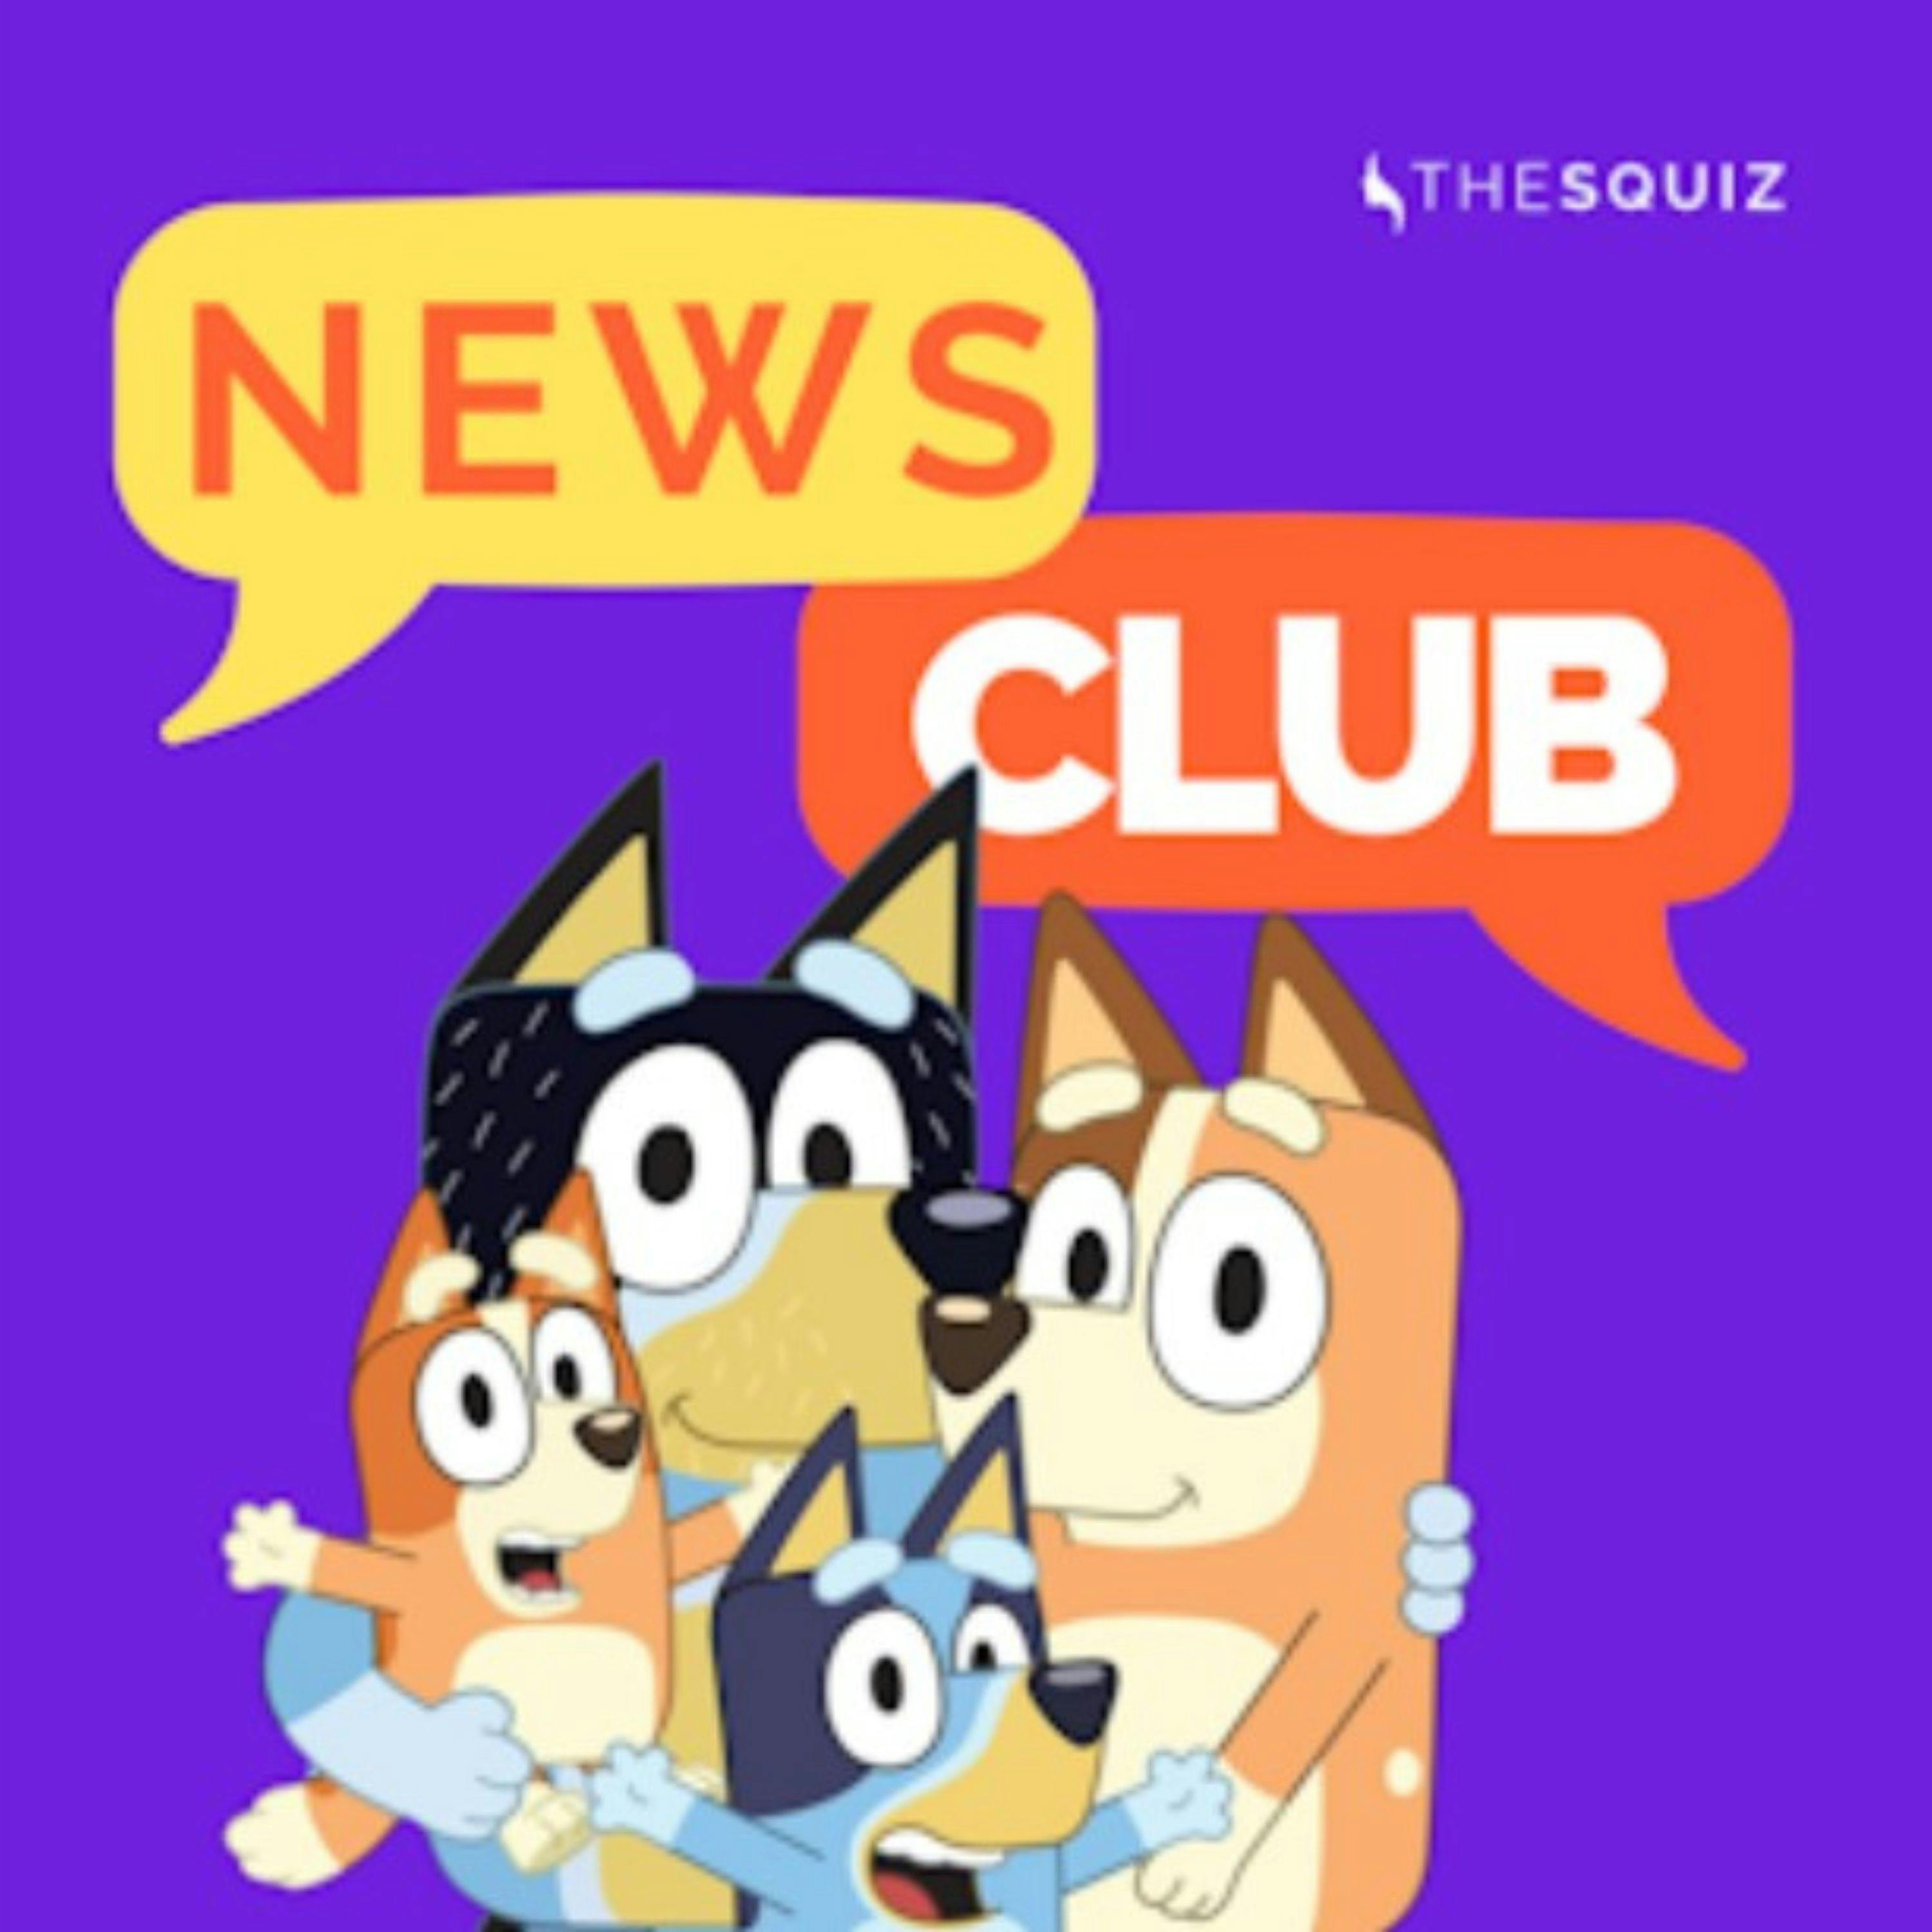 News Club - The business of Bluey